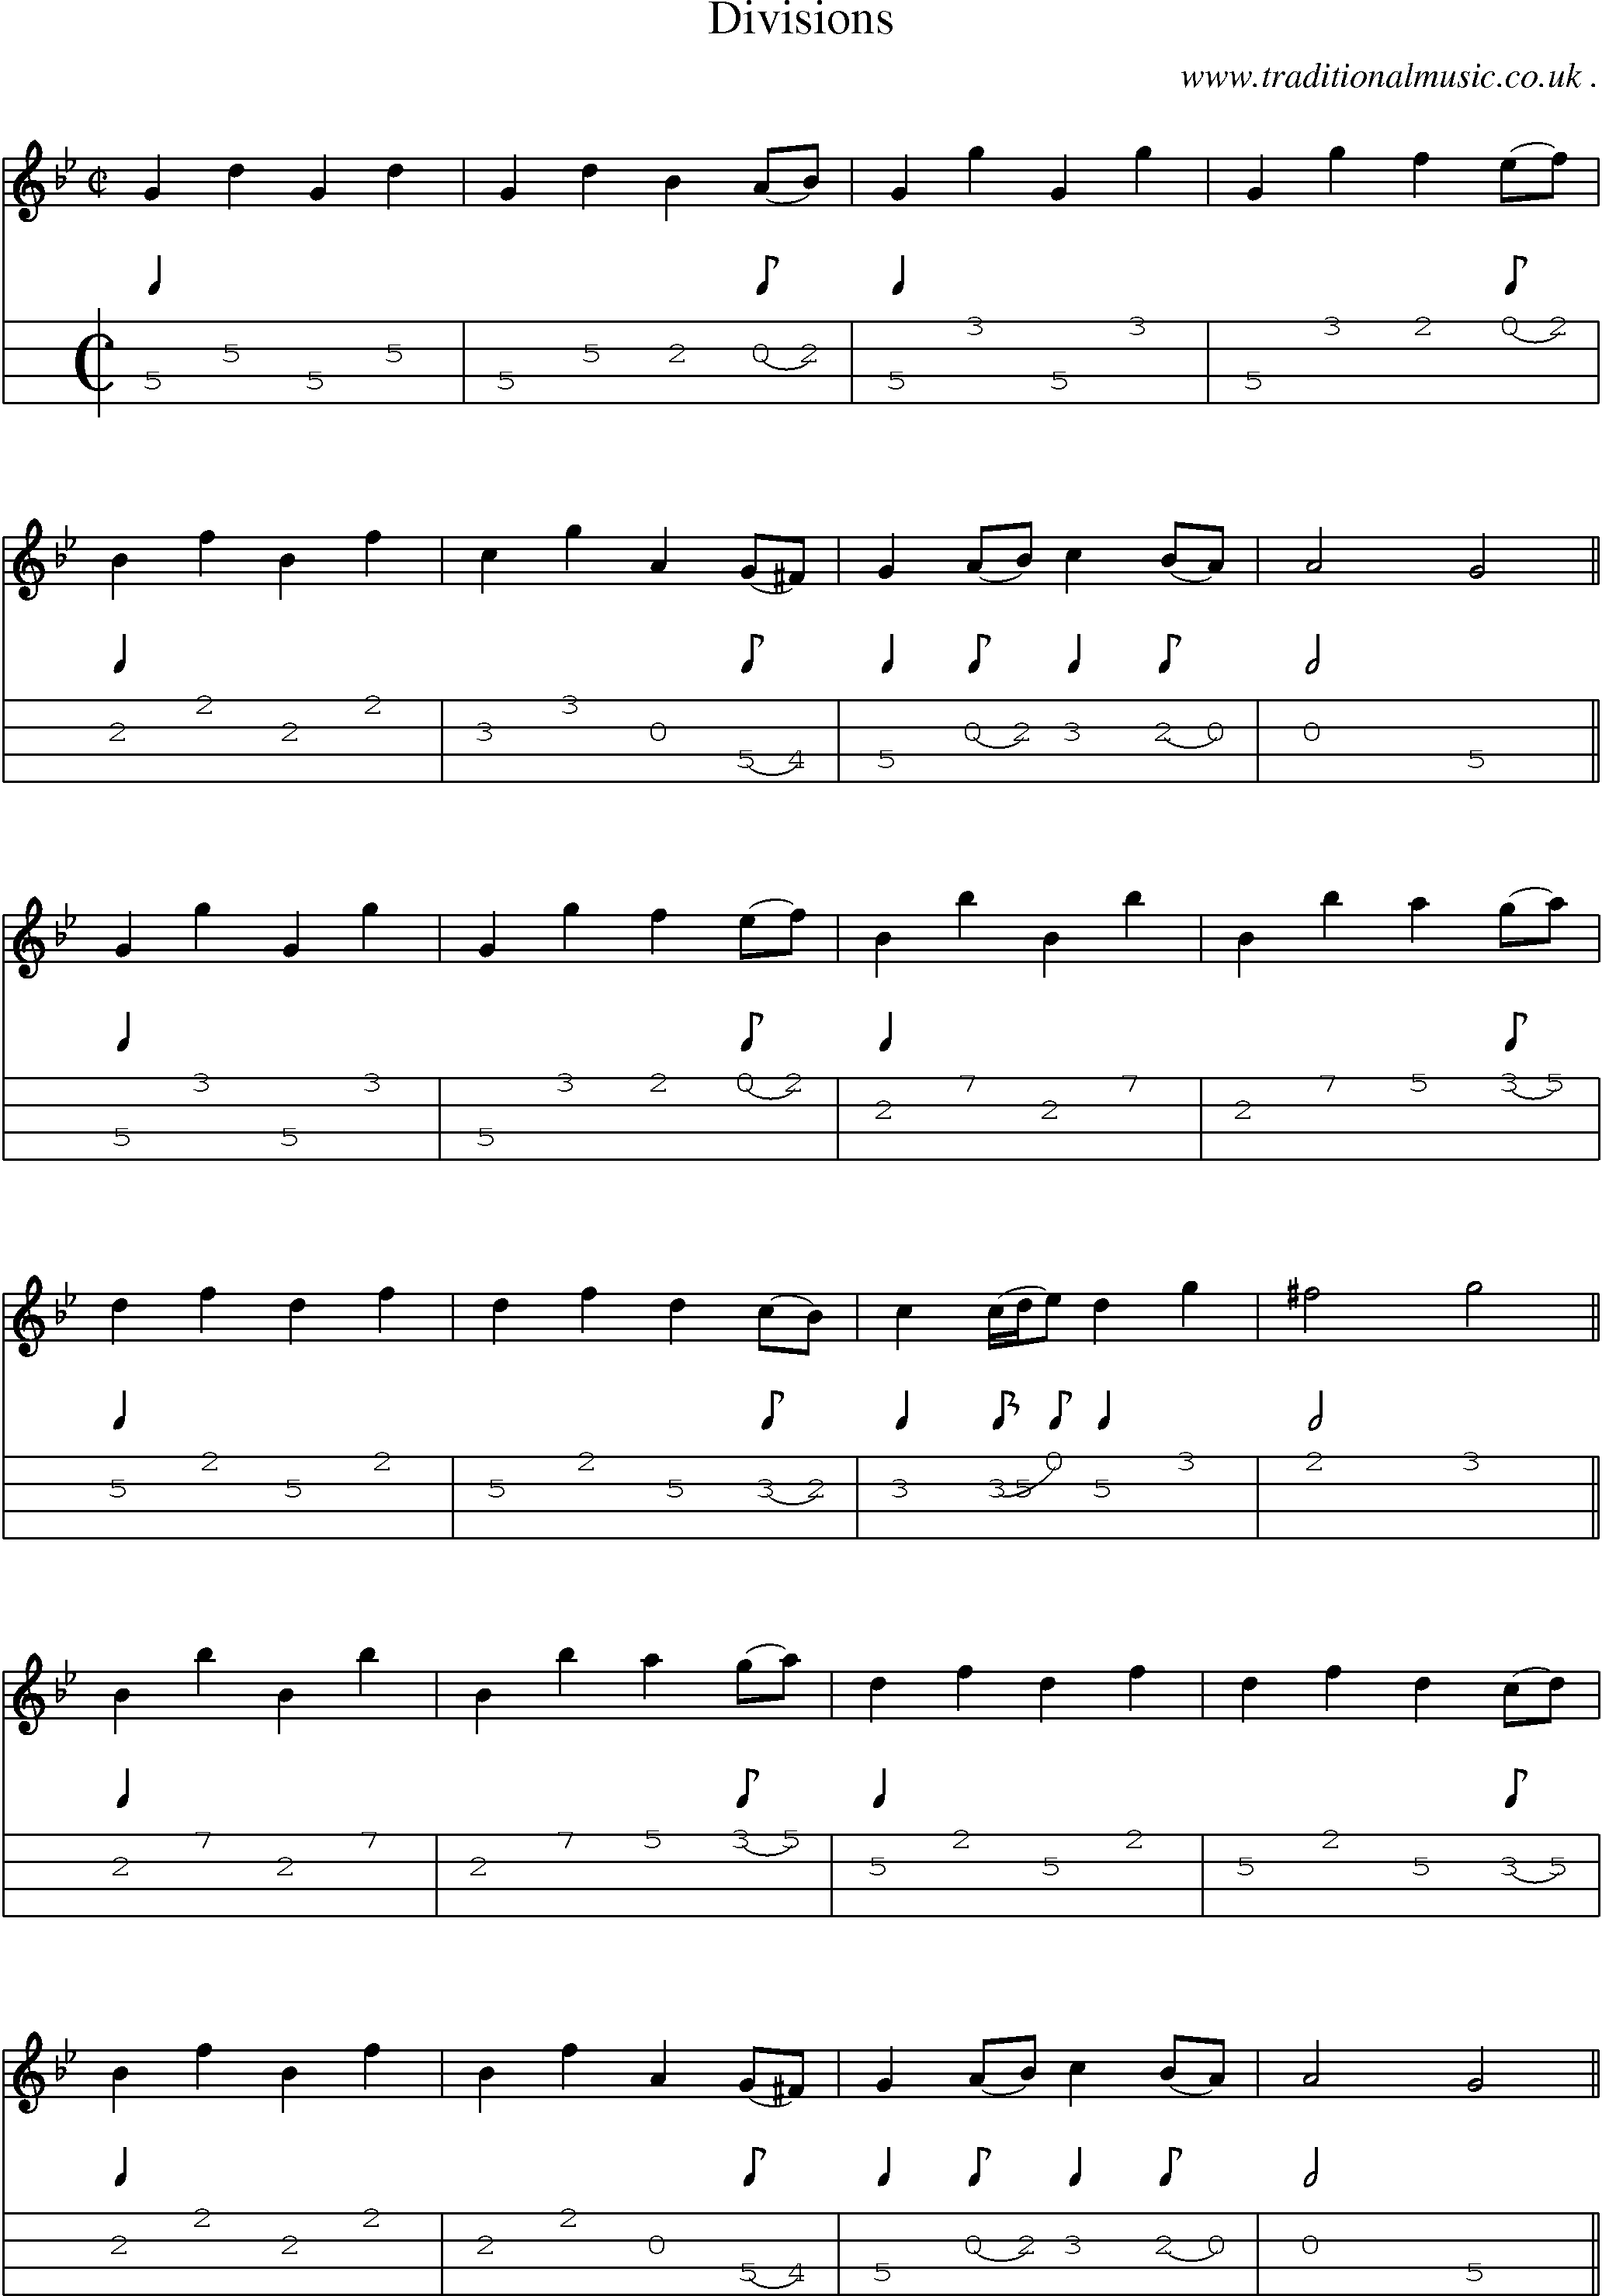 Sheet-Music and Mandolin Tabs for Divisions